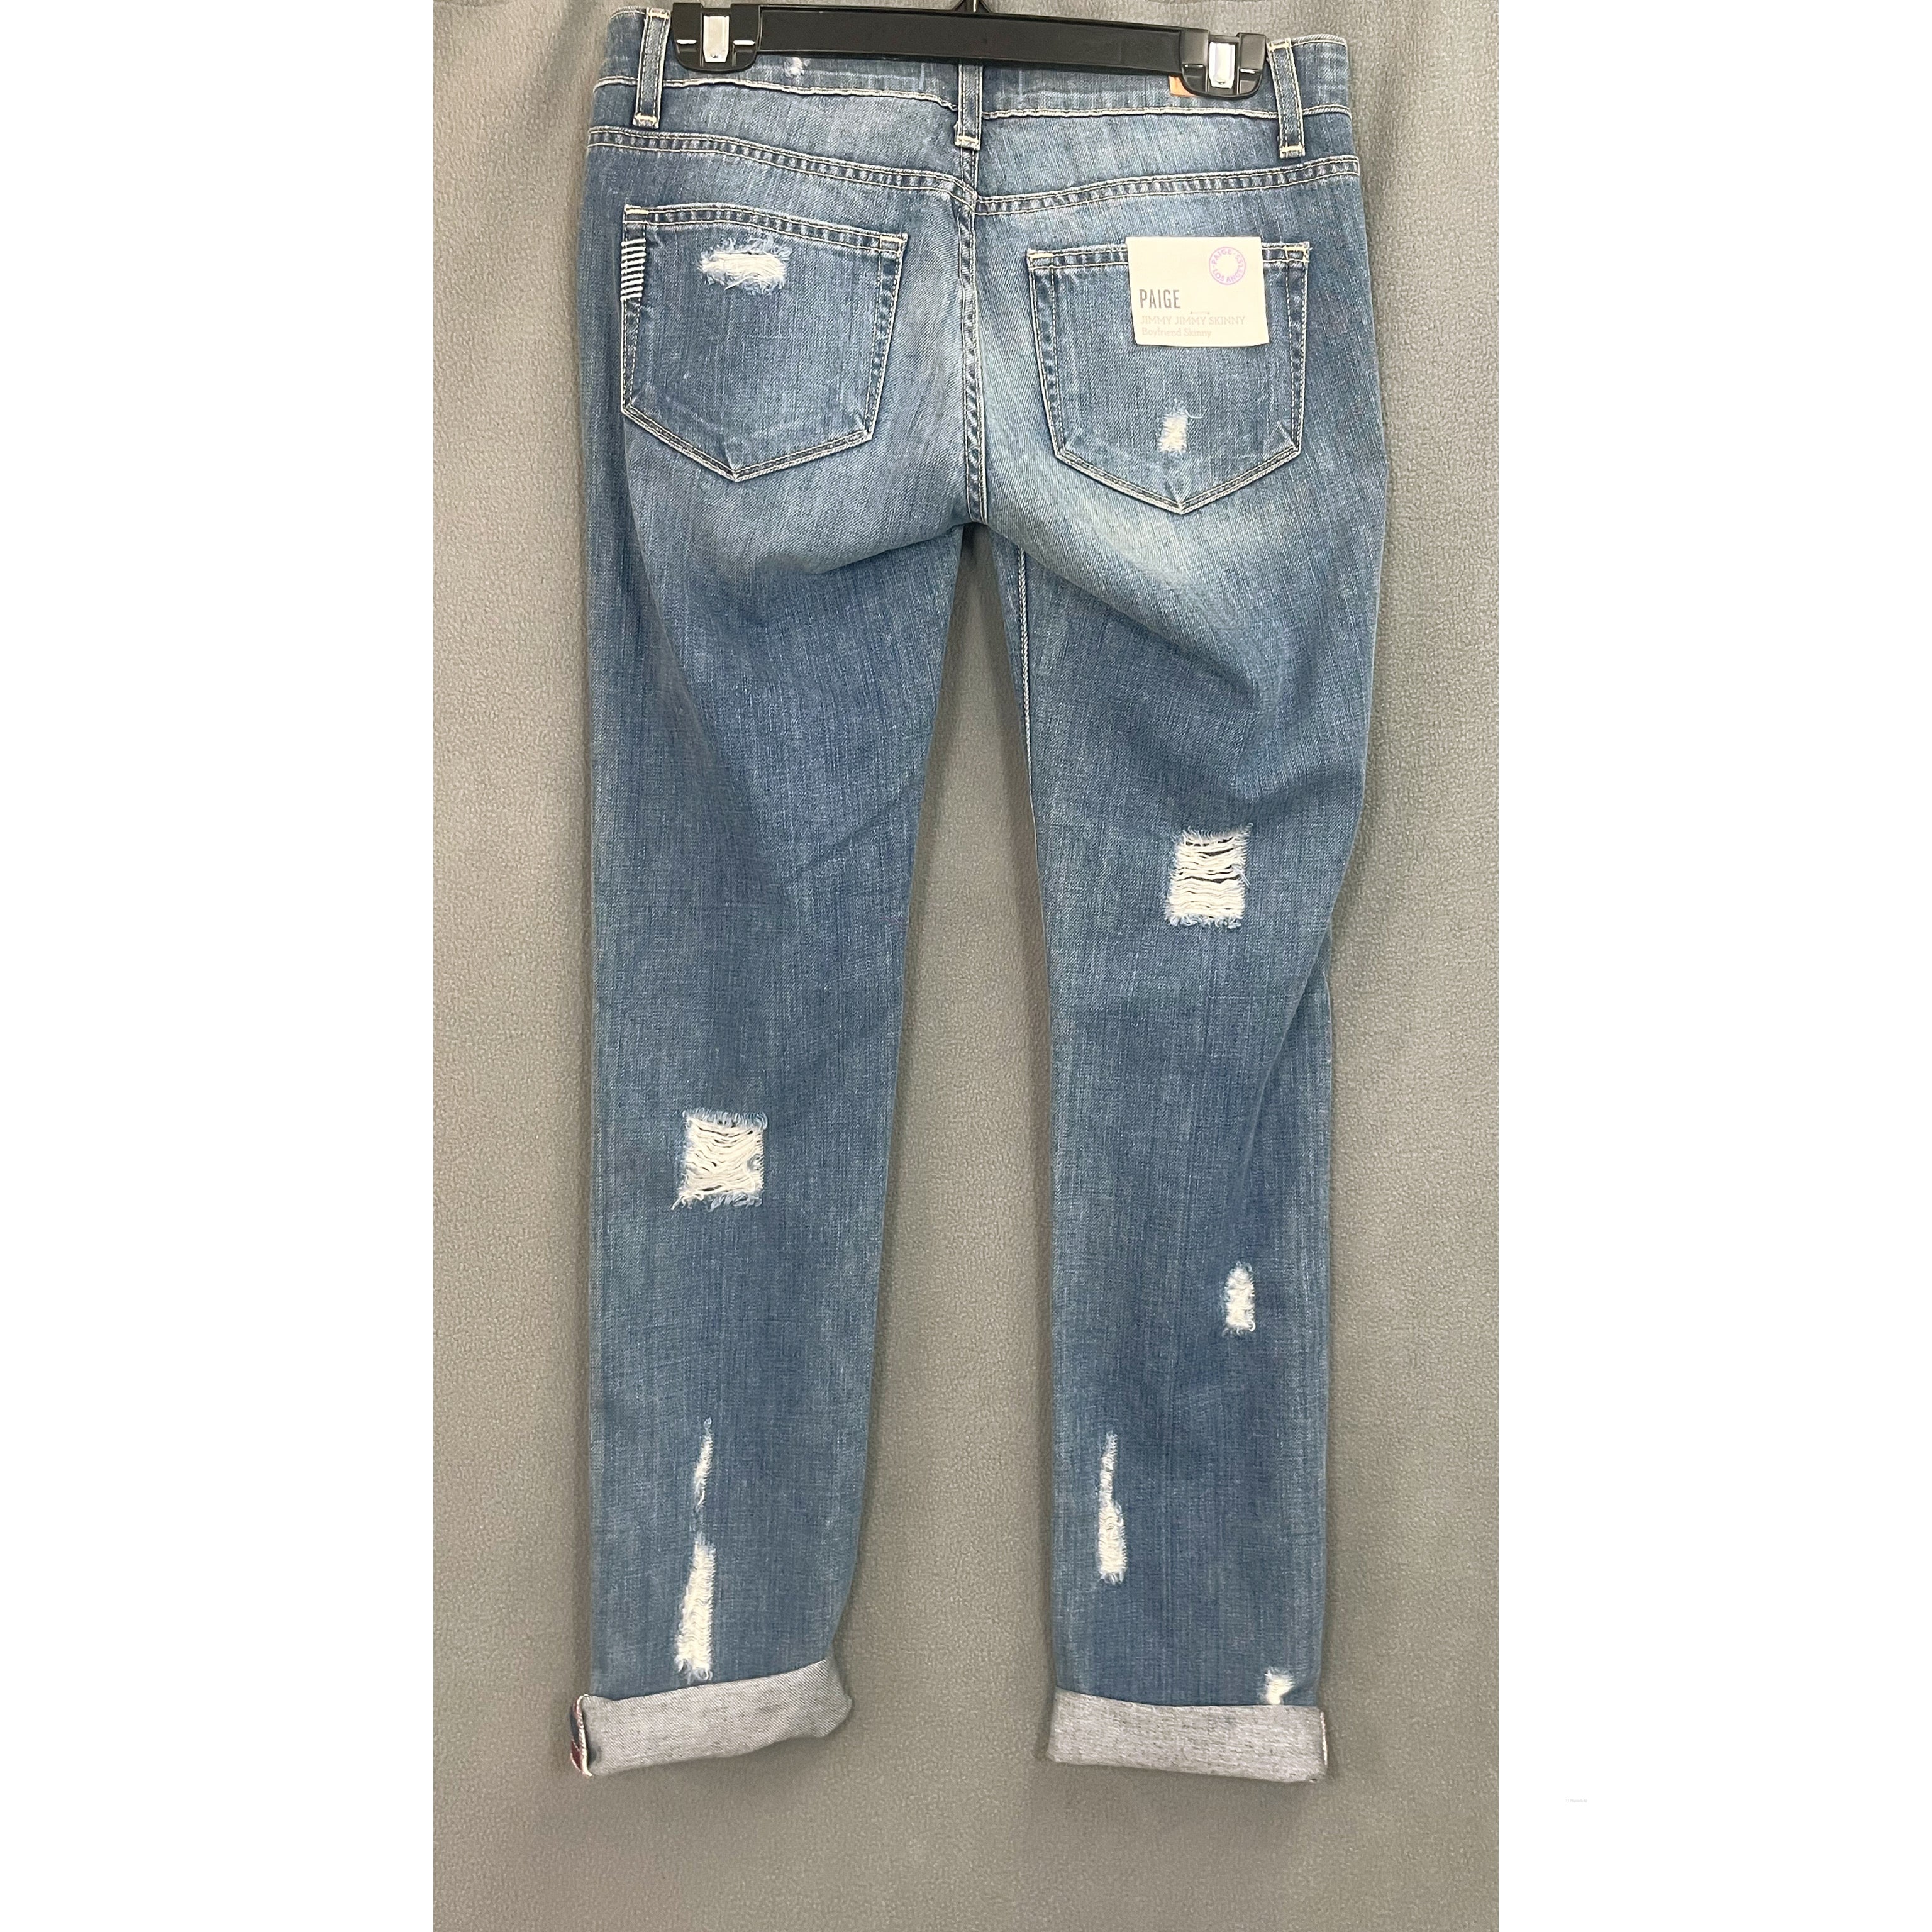 Paige Jimmy Jimmy Riley Destructed jeans, size 24, NEW WITH TAGS!